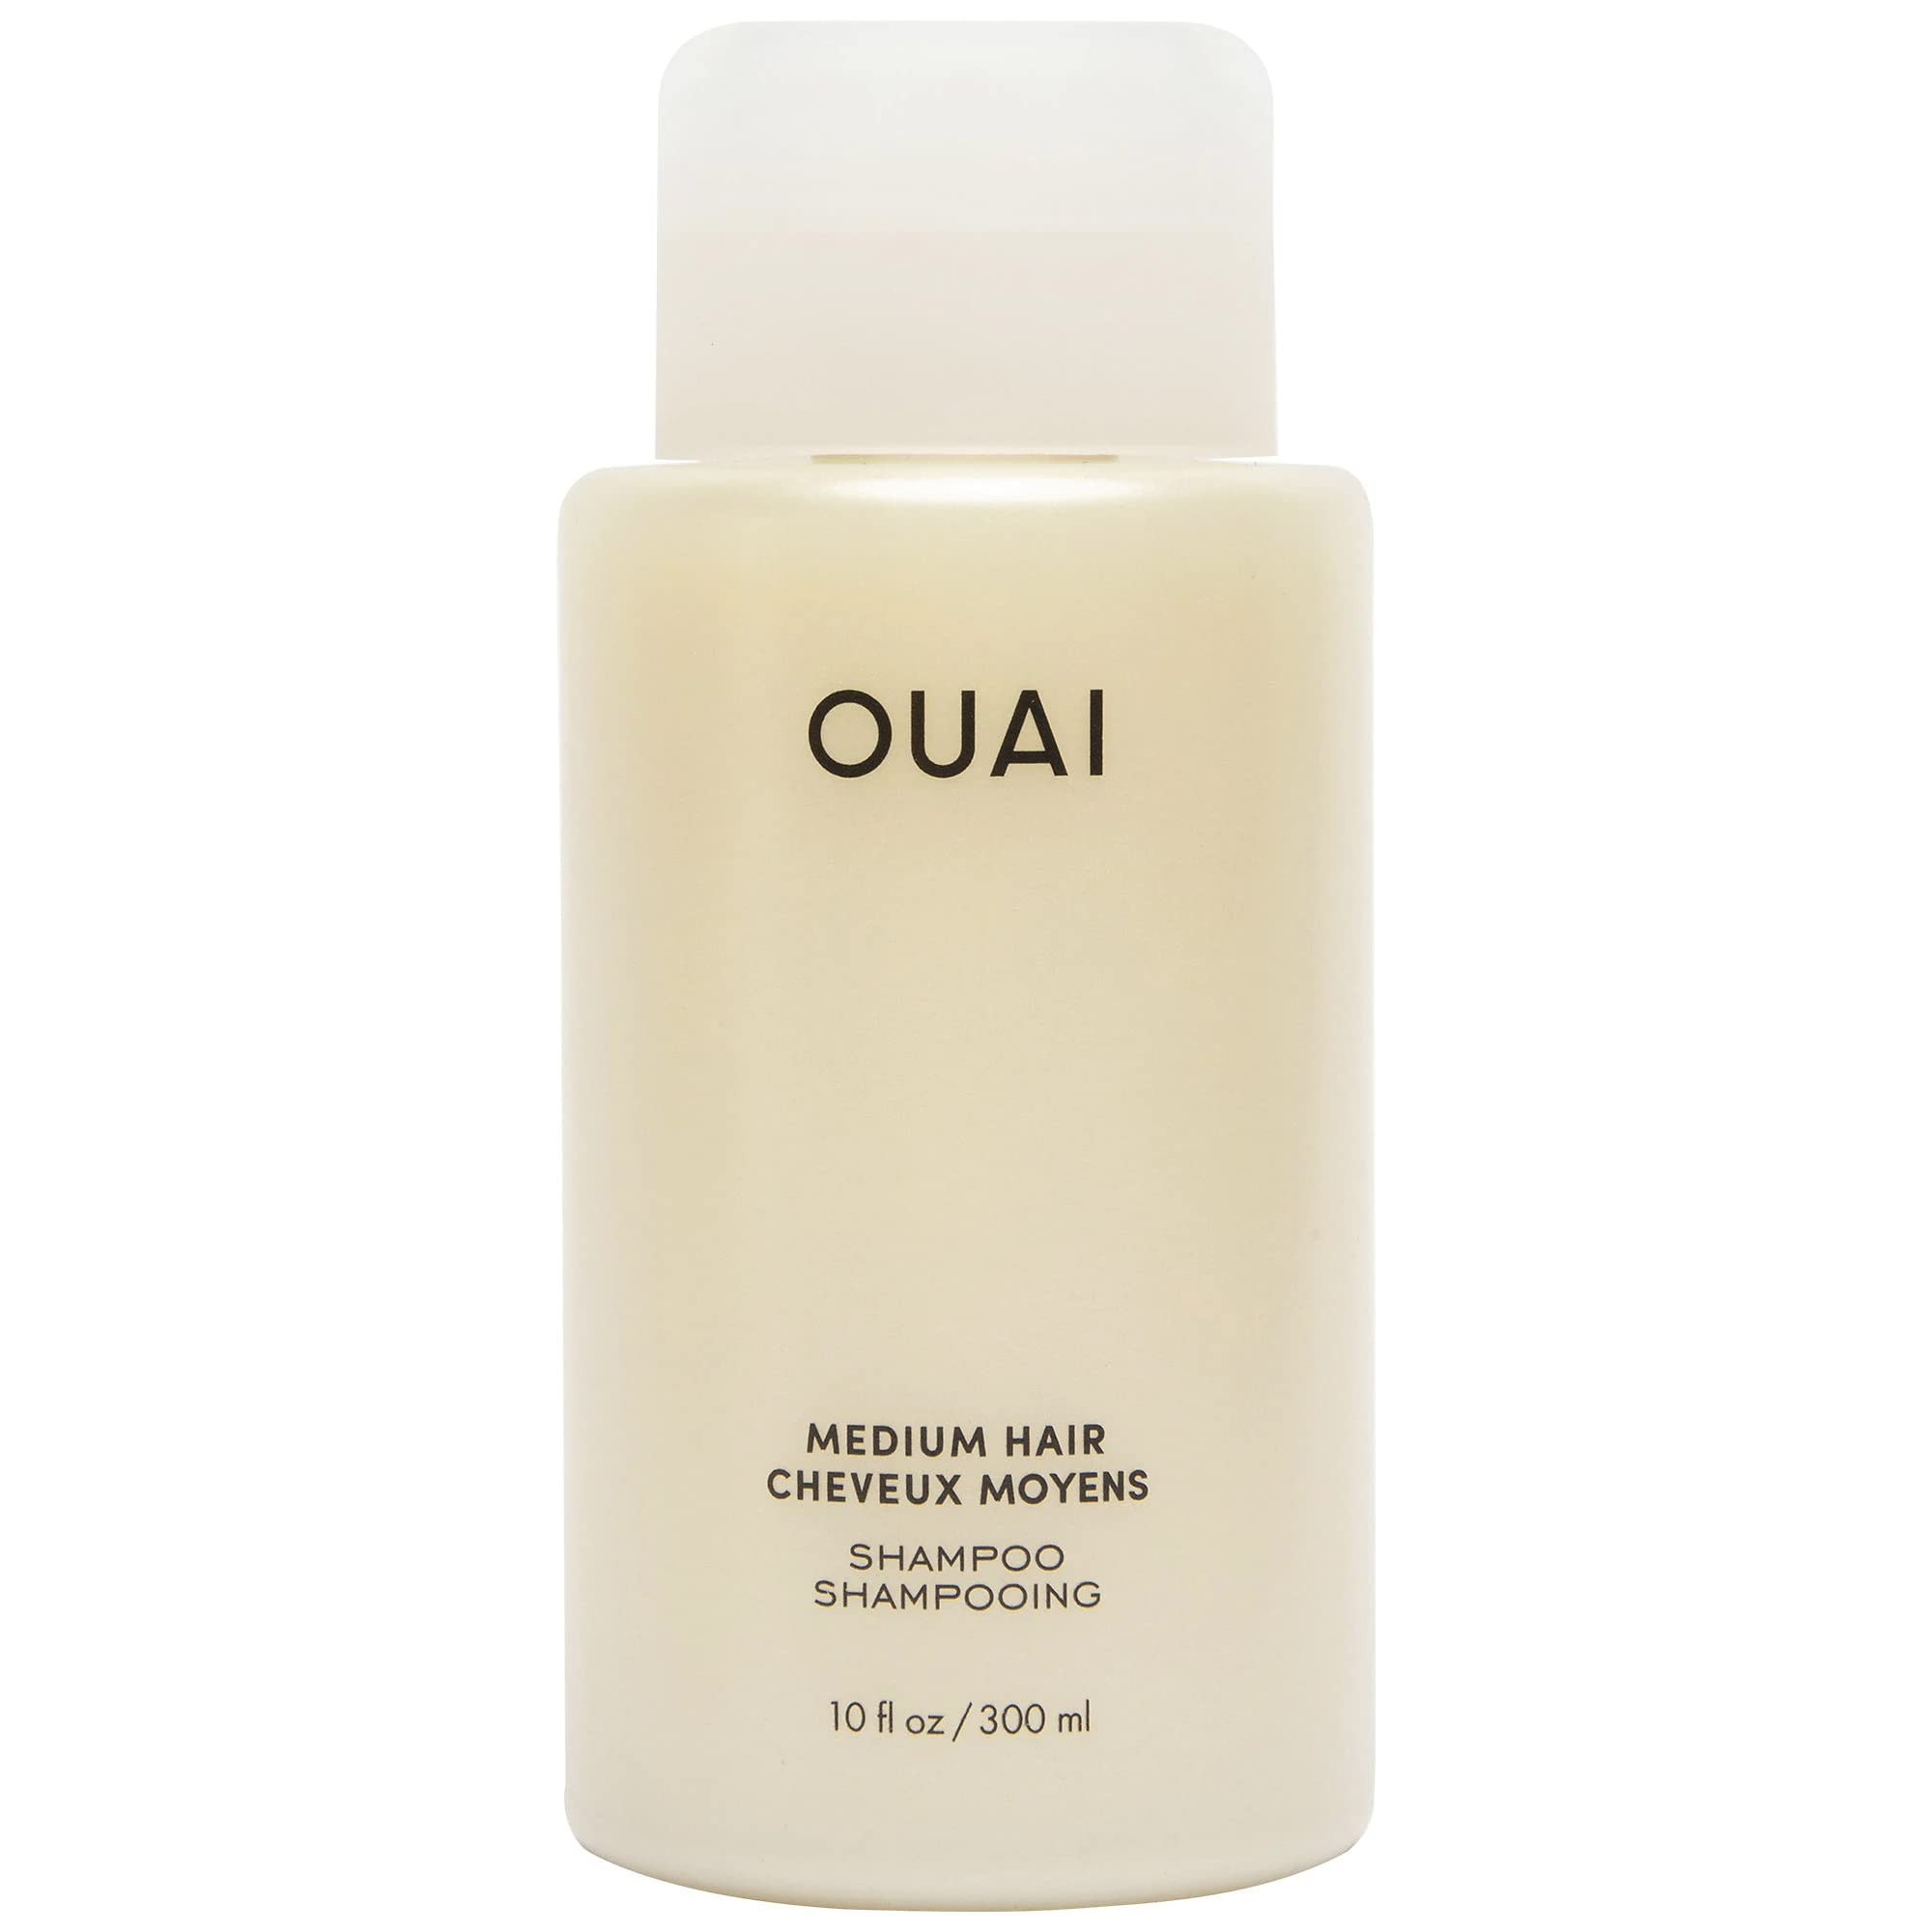 OUAI Medium Shampoo + Conditioner Set - Nourishes with Babassu and Coconut Oils, Strengthens with Keratin & Adds Shine with Kumquat Extract - Free of Parabens, Sulfates & Phthalates - 10 fl oz Each